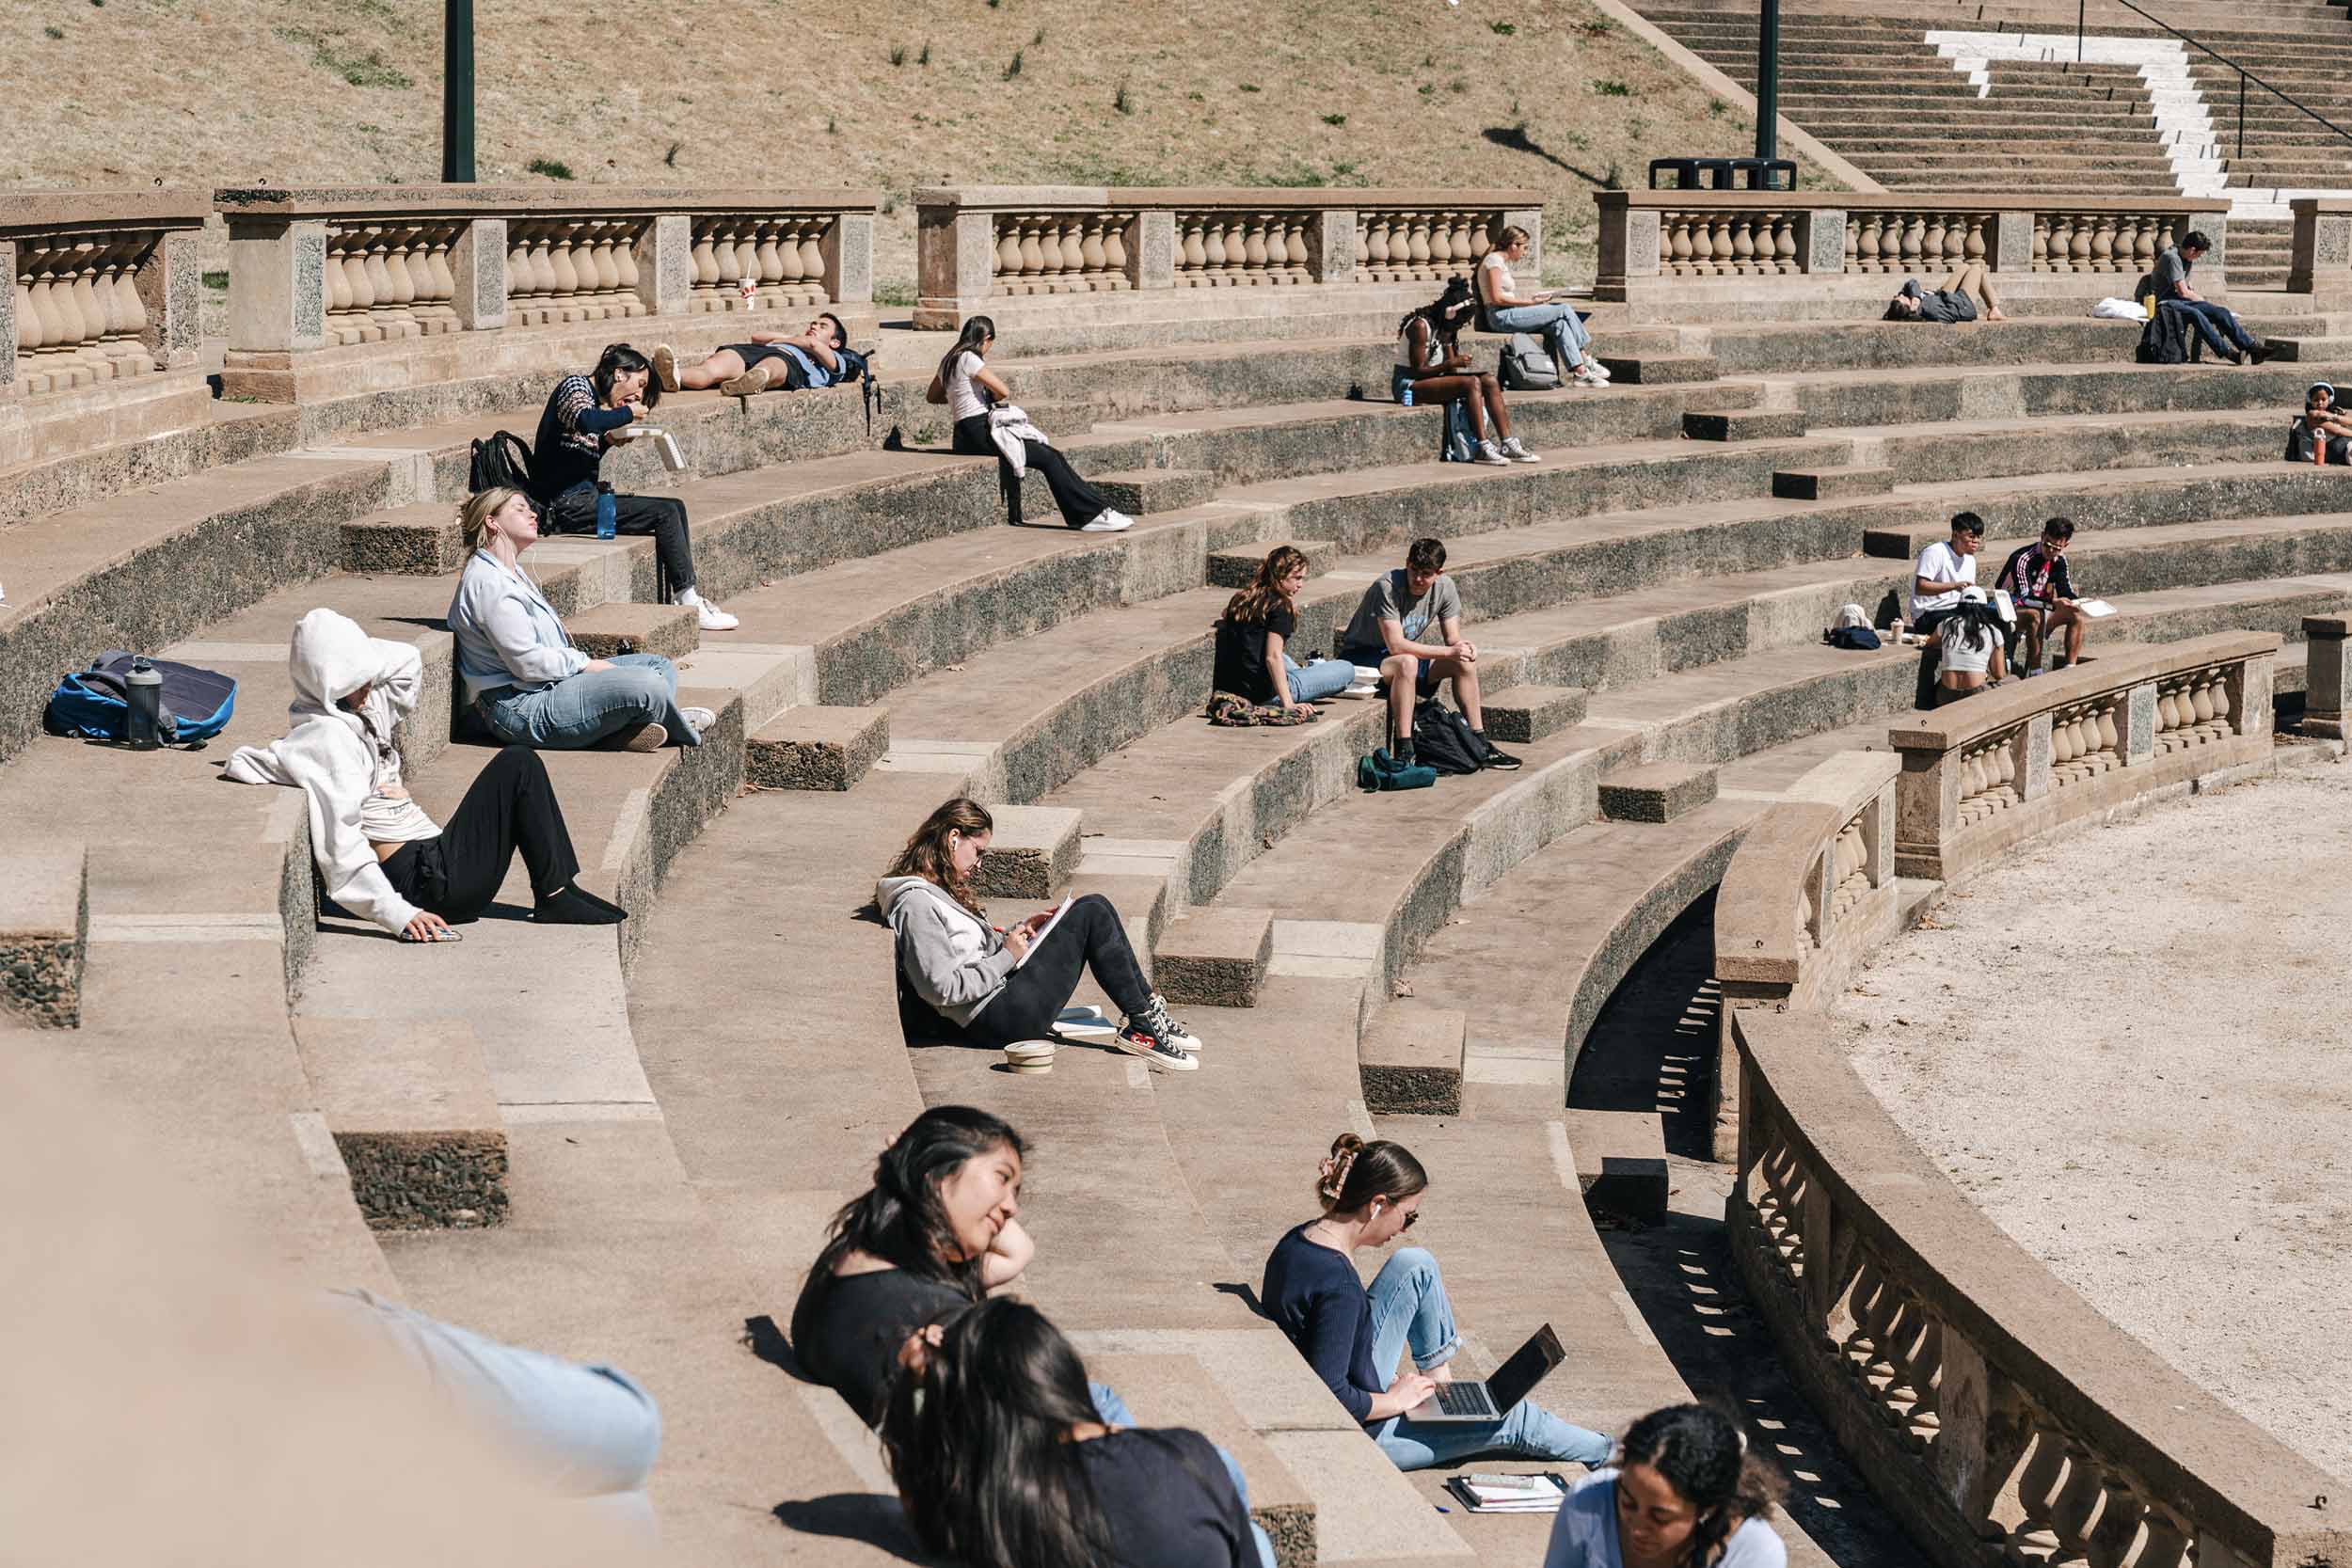 Originial photo of students sitting in an outdoor amphitheater on a warm spring day on grounds